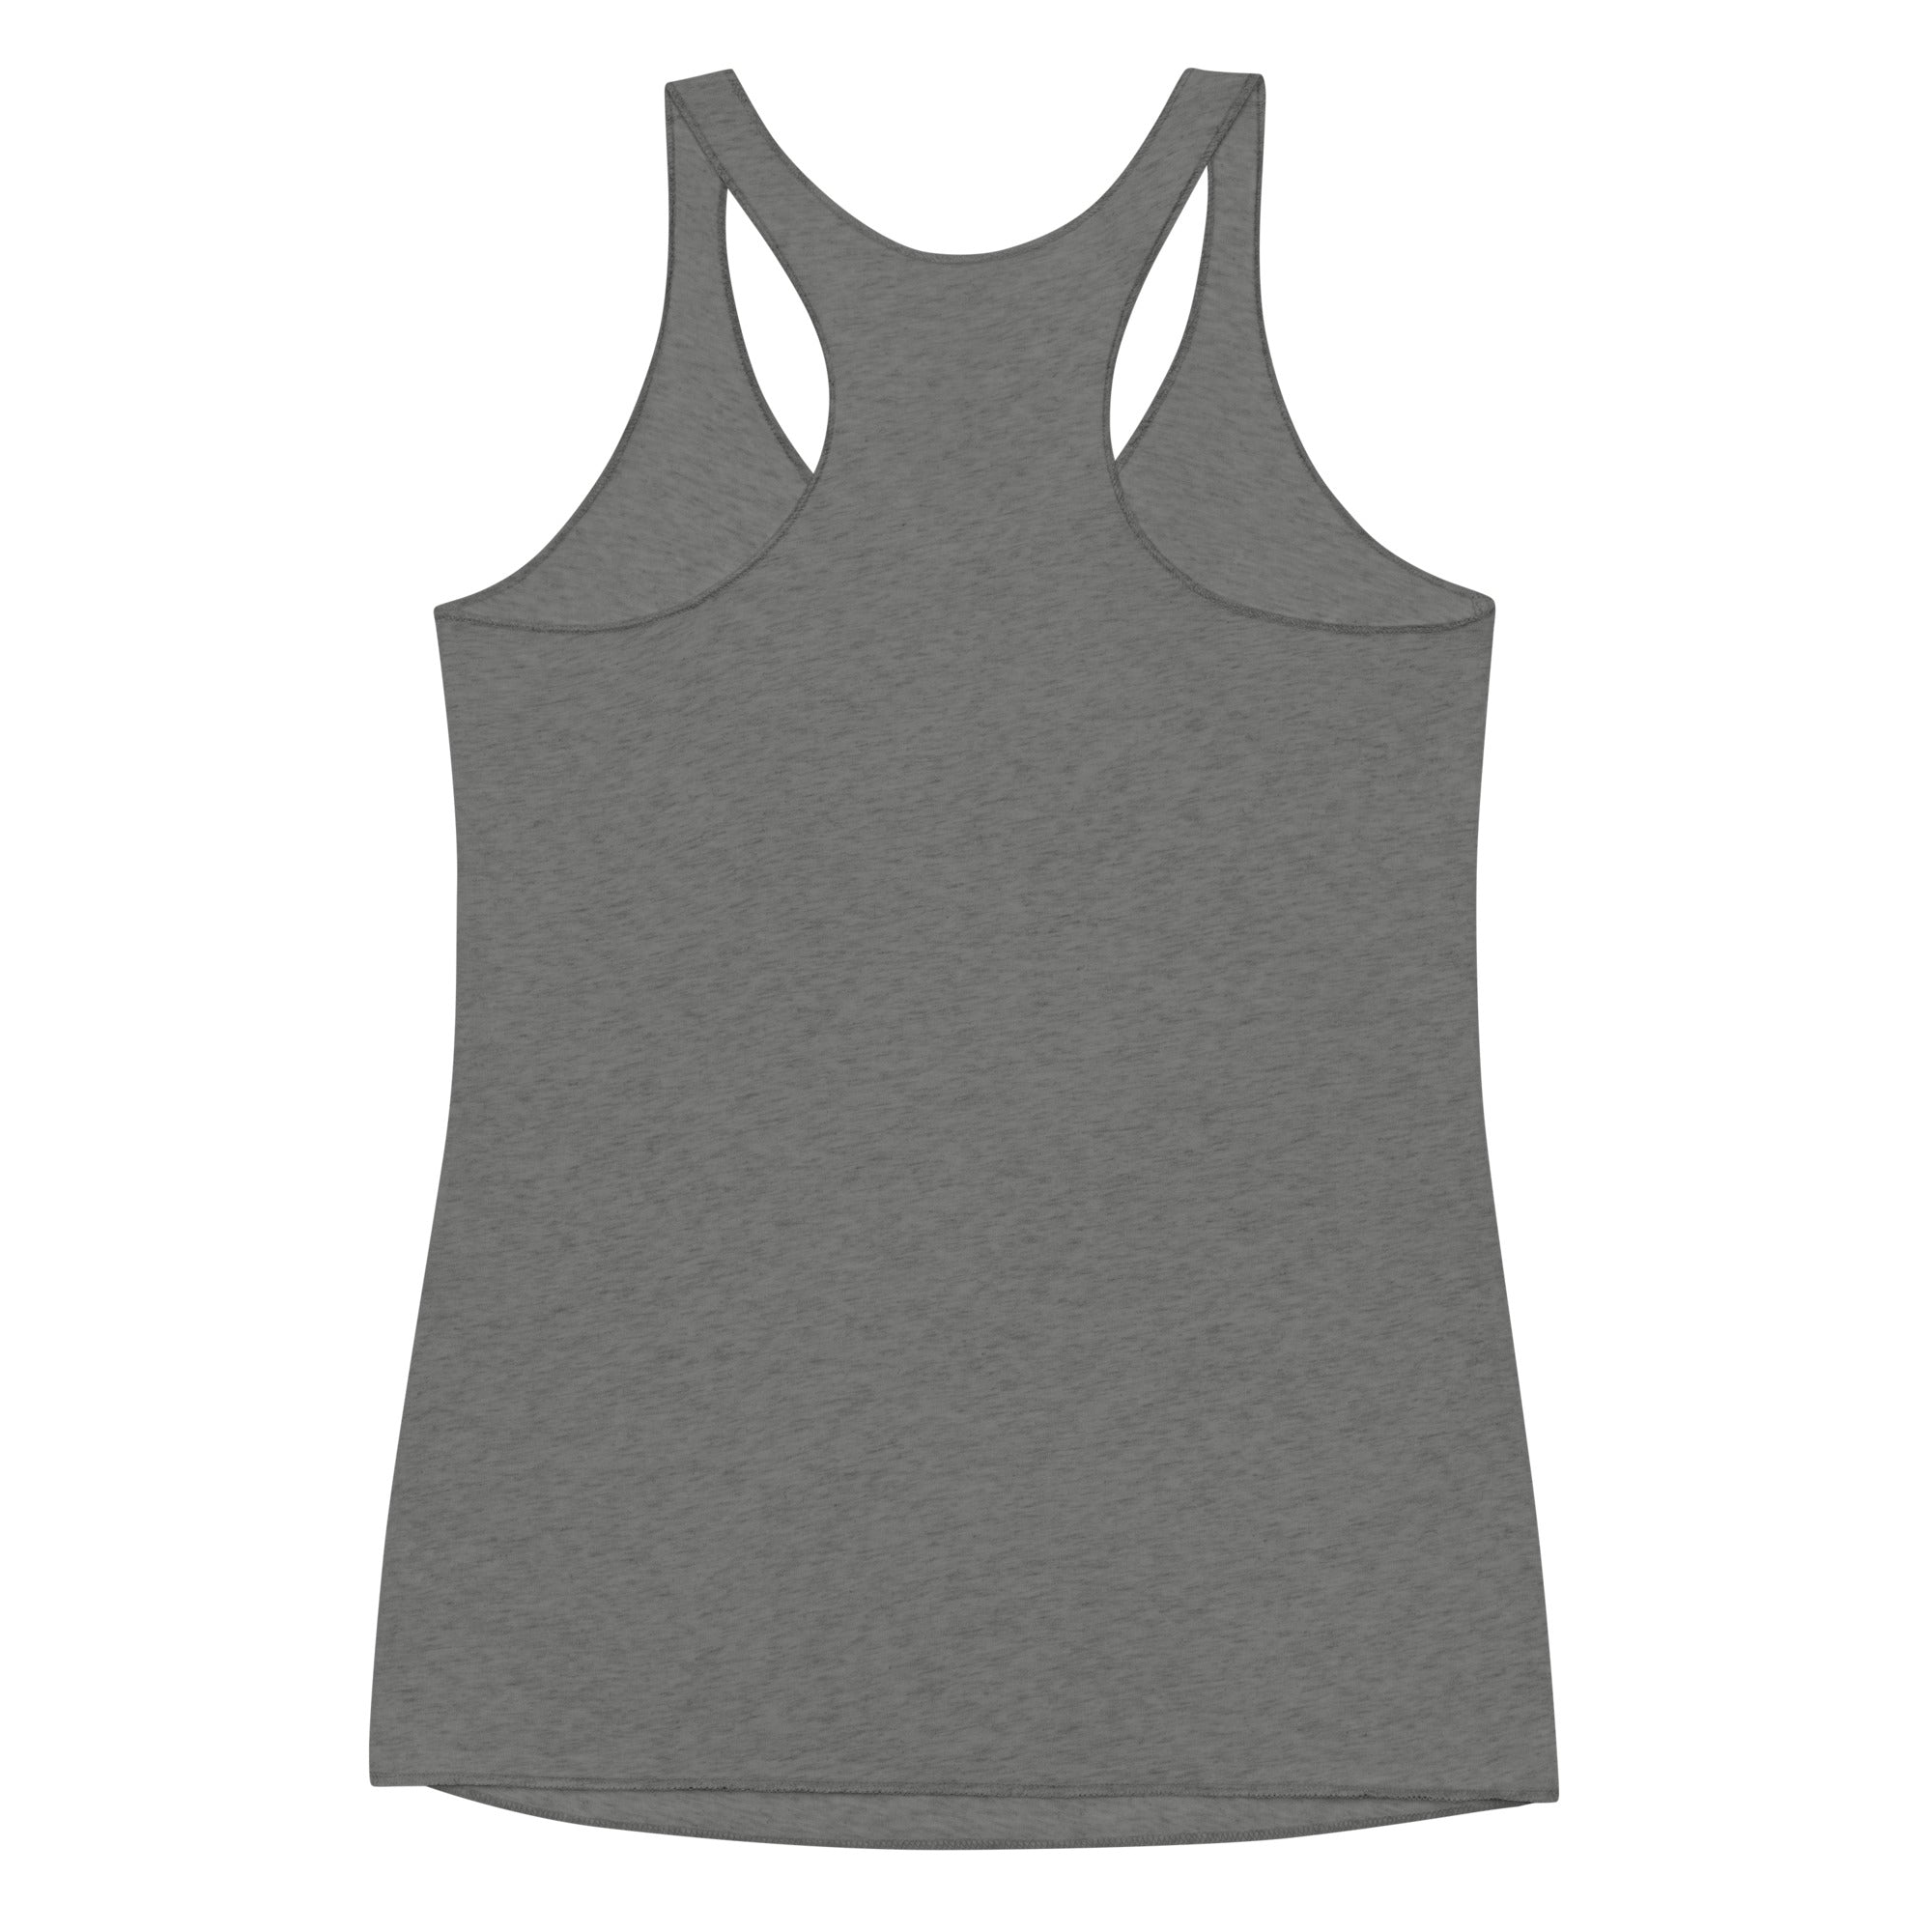 Rugby Imports Montclair Women's Racerback Tank Top